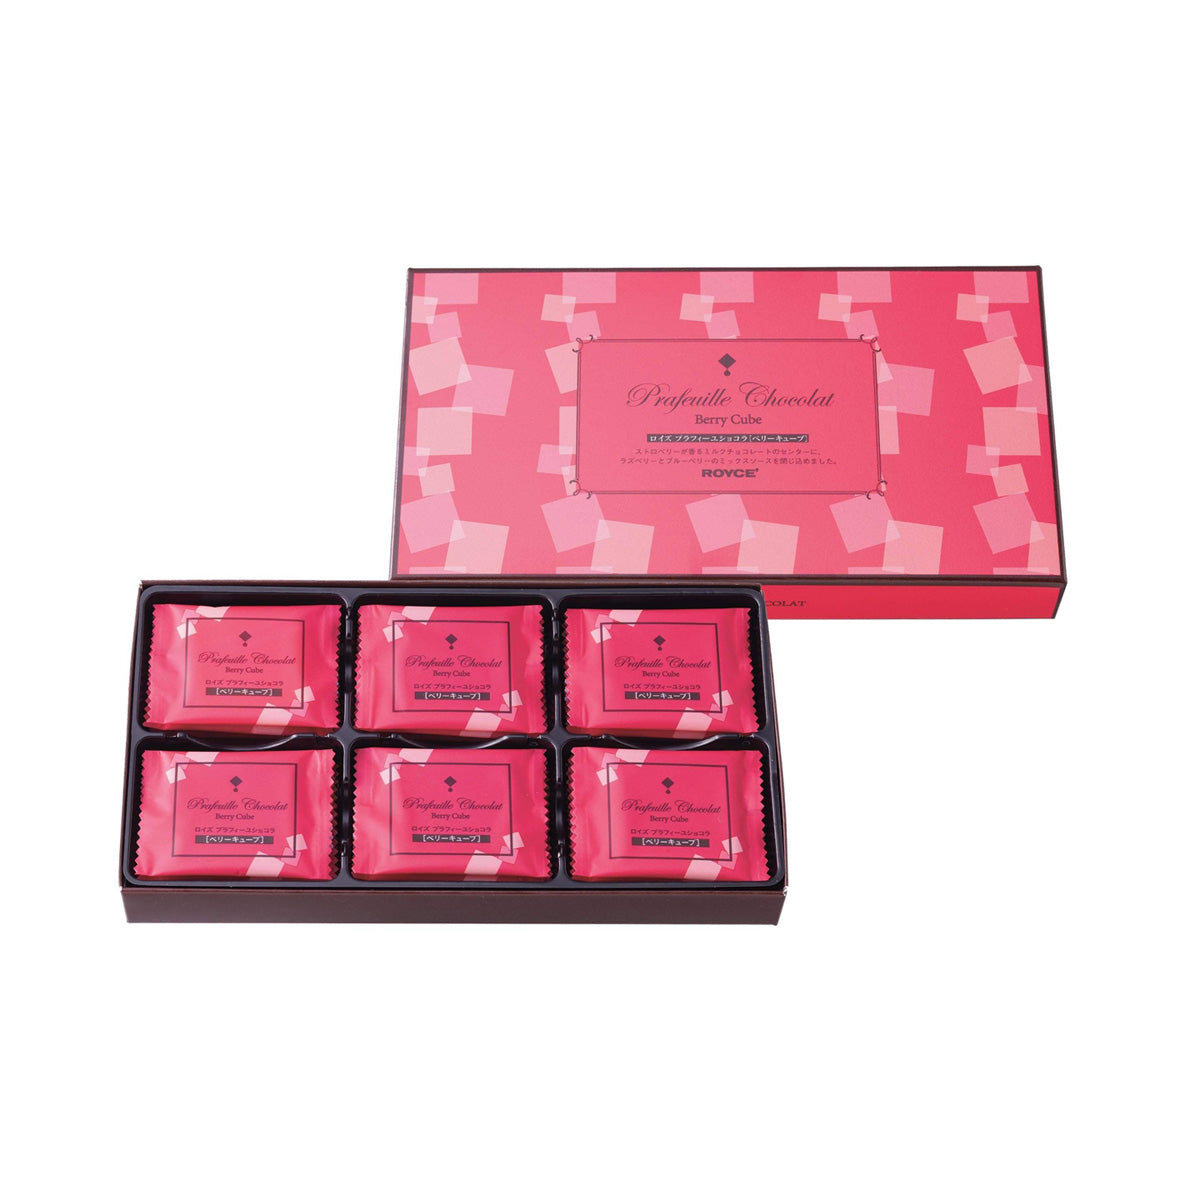 ROYCE' Chocolate - Prafeuille Chocolat "Berry Cube" - Image shows on top center right a pink box with cube prints. Text says Prafeuille Chocolat Berry Cube ROYCE'. Below on center left is a box with individually-wrapped chocolates with pink wrapper and cube prints. Text says Prafeuille Chocolat Berry Cube.